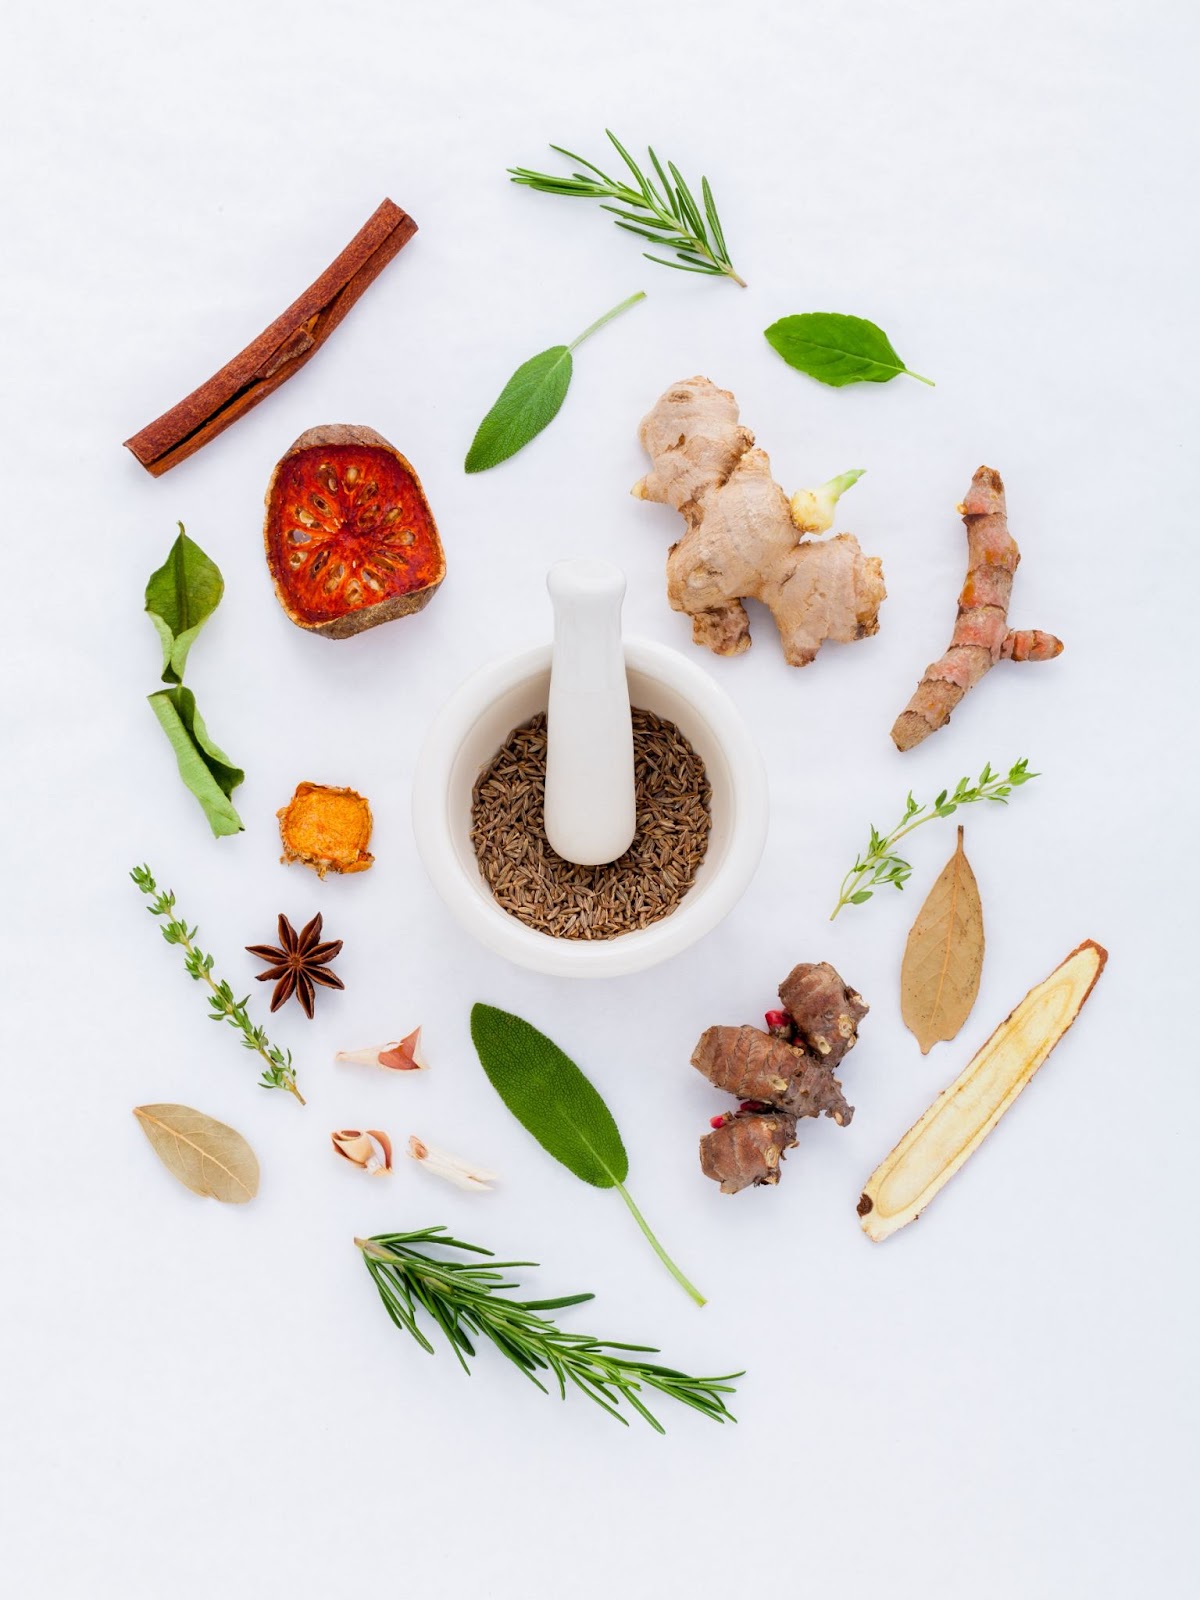 The use of natural herbs in traditional Chinese medicine